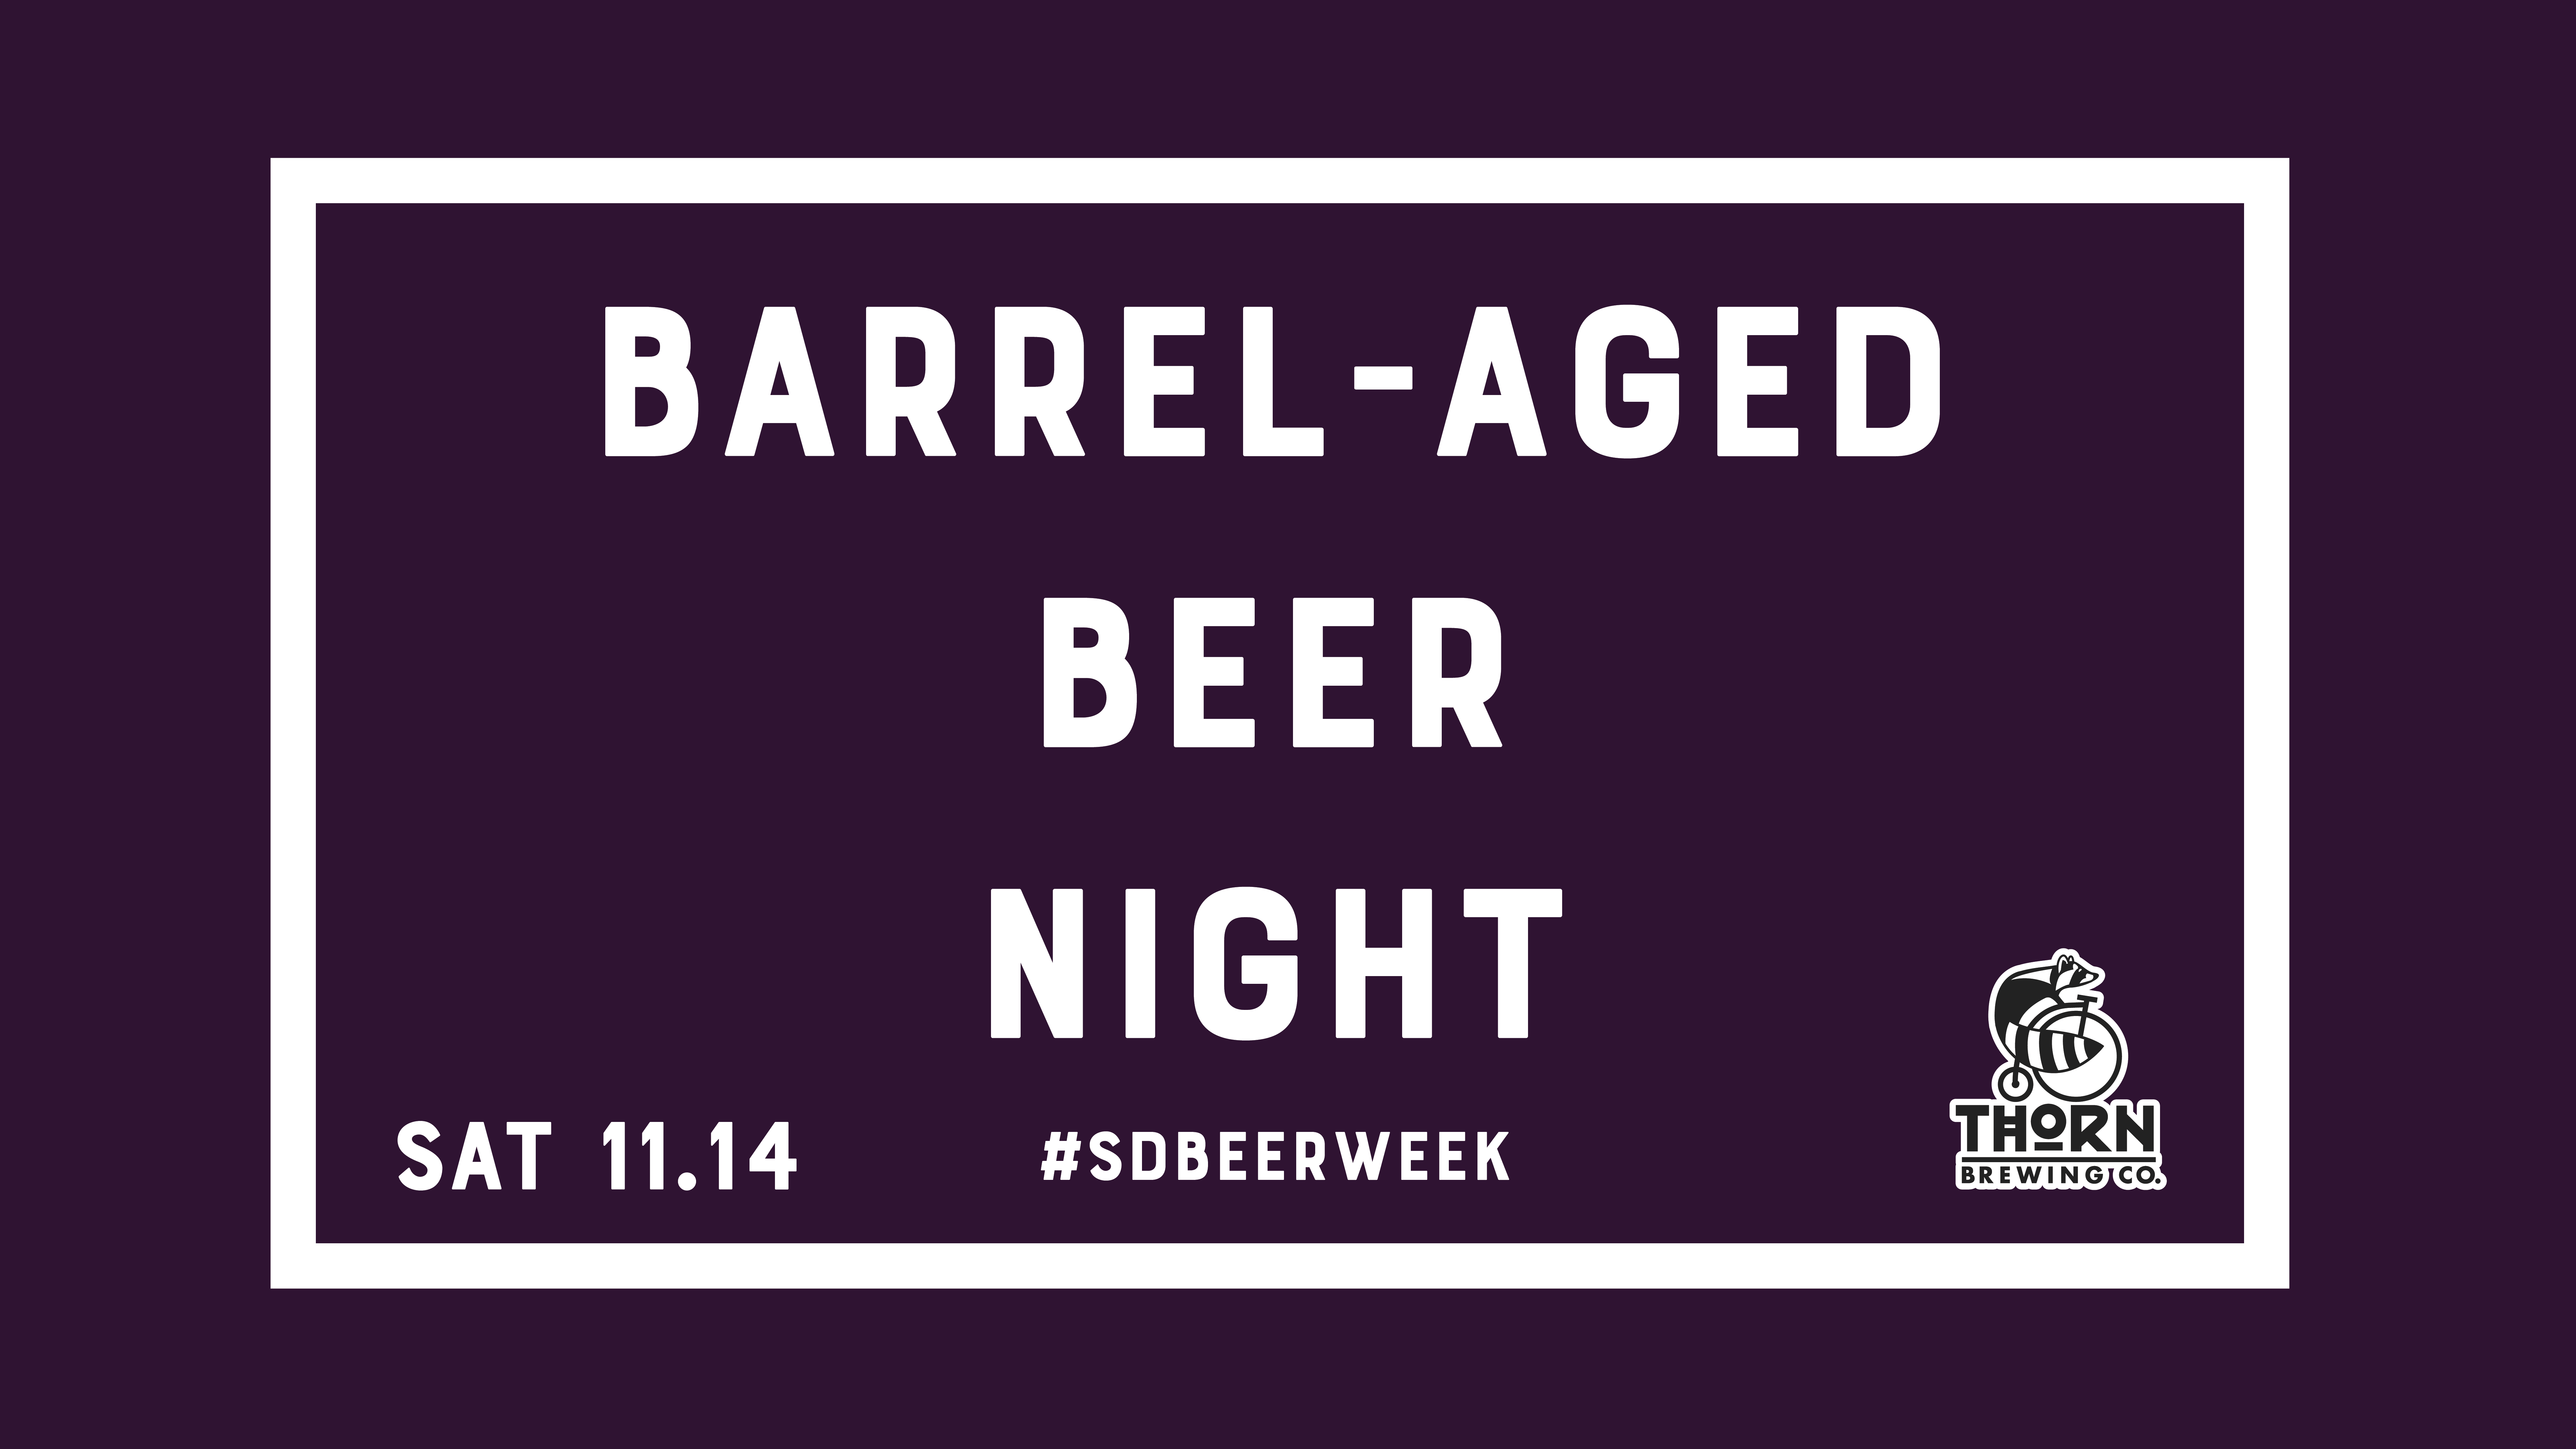 text saying barrel-aged beer night